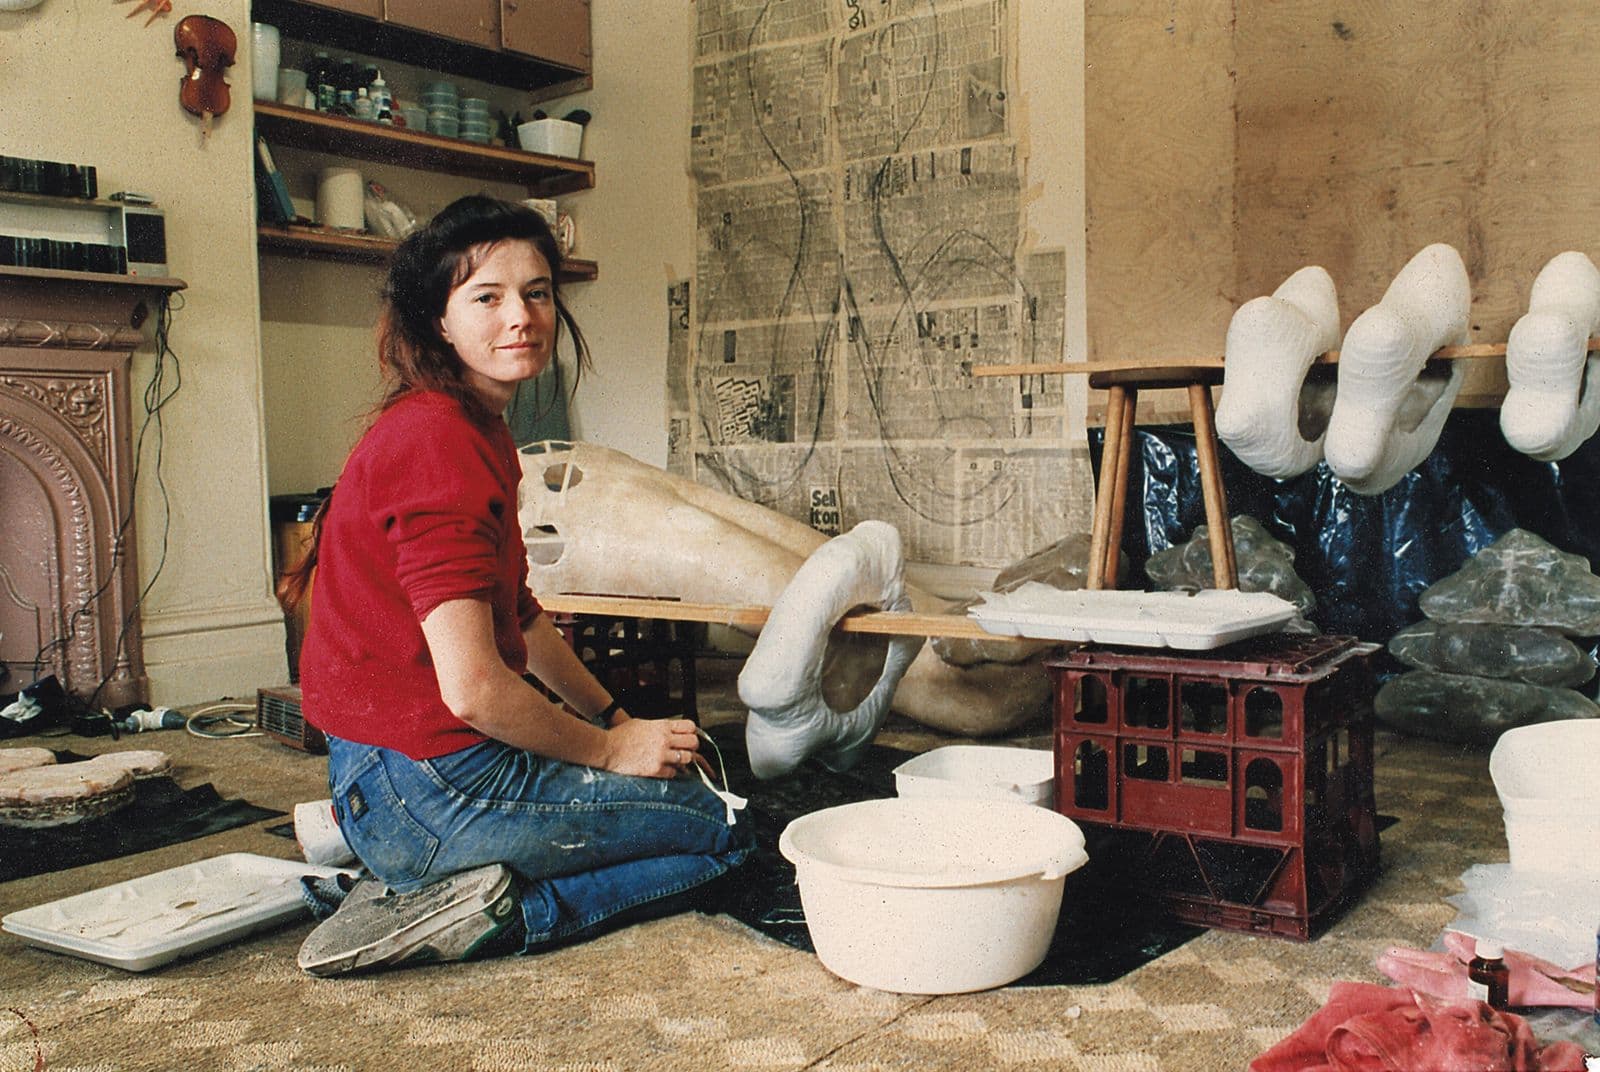 A photograph of a woman in a red shirt gazing back at the camera in an artists studio.